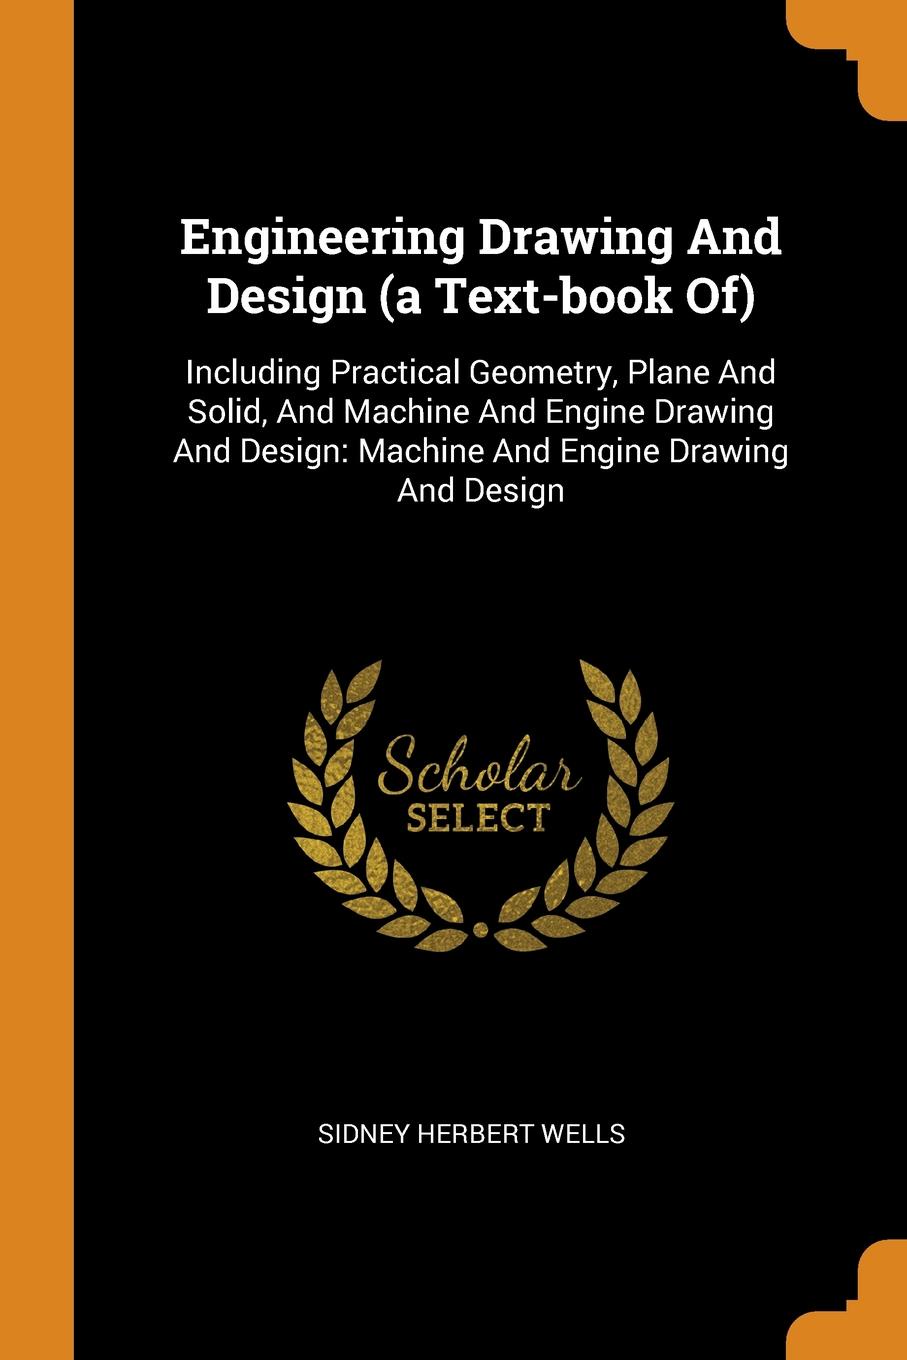 Engineering Drawing And Design (a Text-book Of). Including Practical Geometry, Plane And Solid, And Machine And Engine Drawing And Design: Machine And Engine Drawing And Design